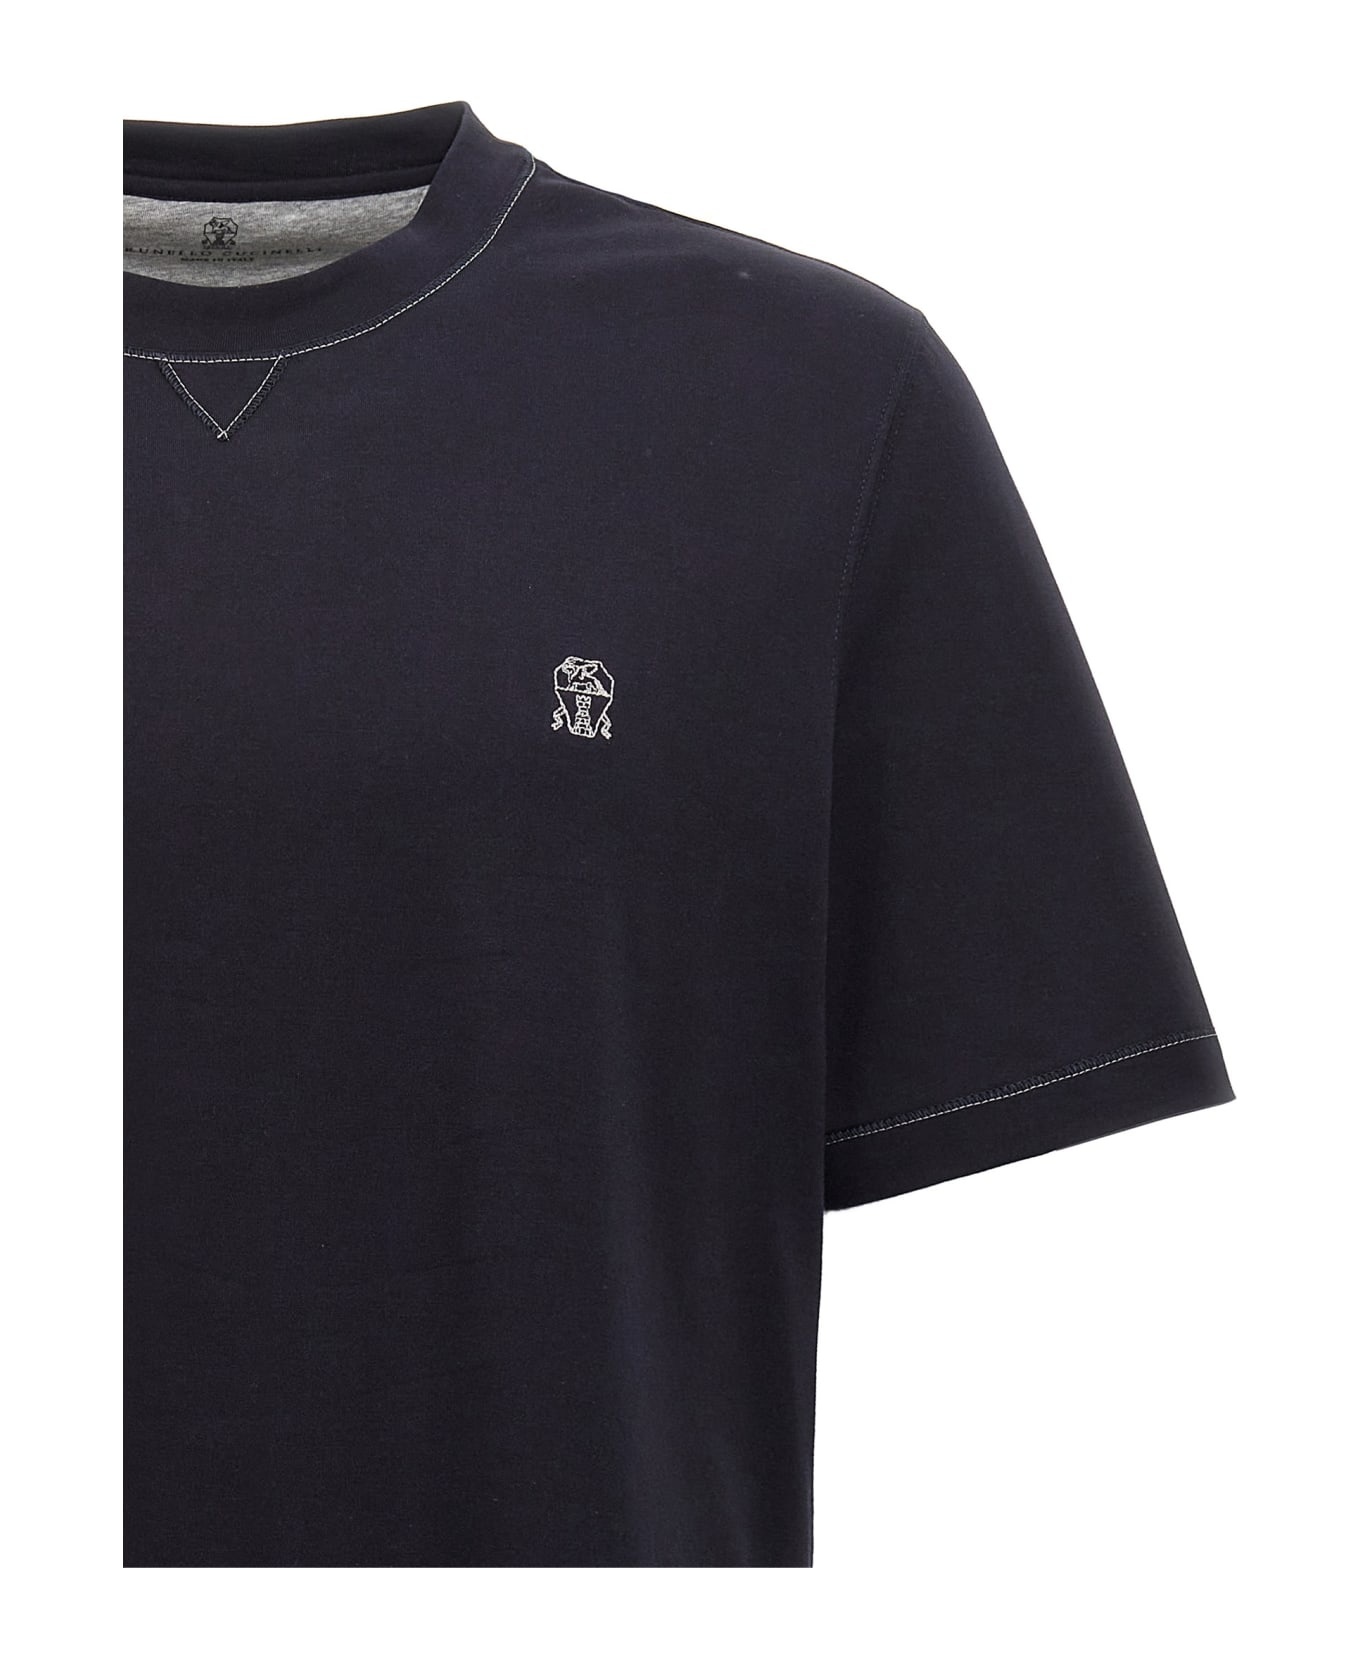 Logo Embroidery T-shirt - 3